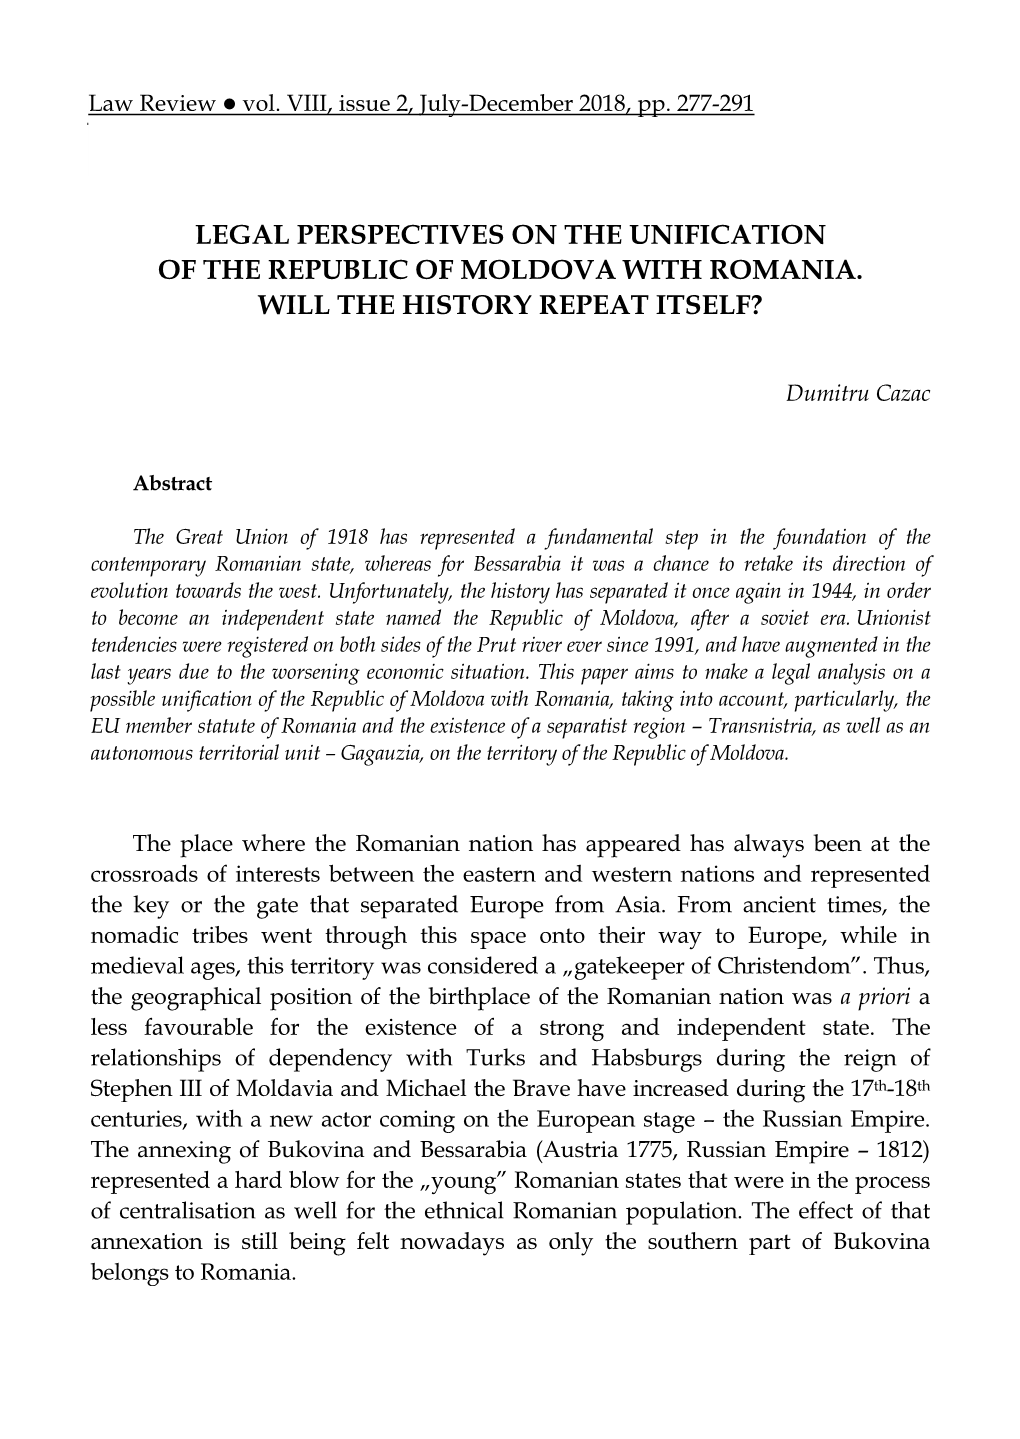 Legal Perspectives on the Unification of the Republic of Moldova with Romania